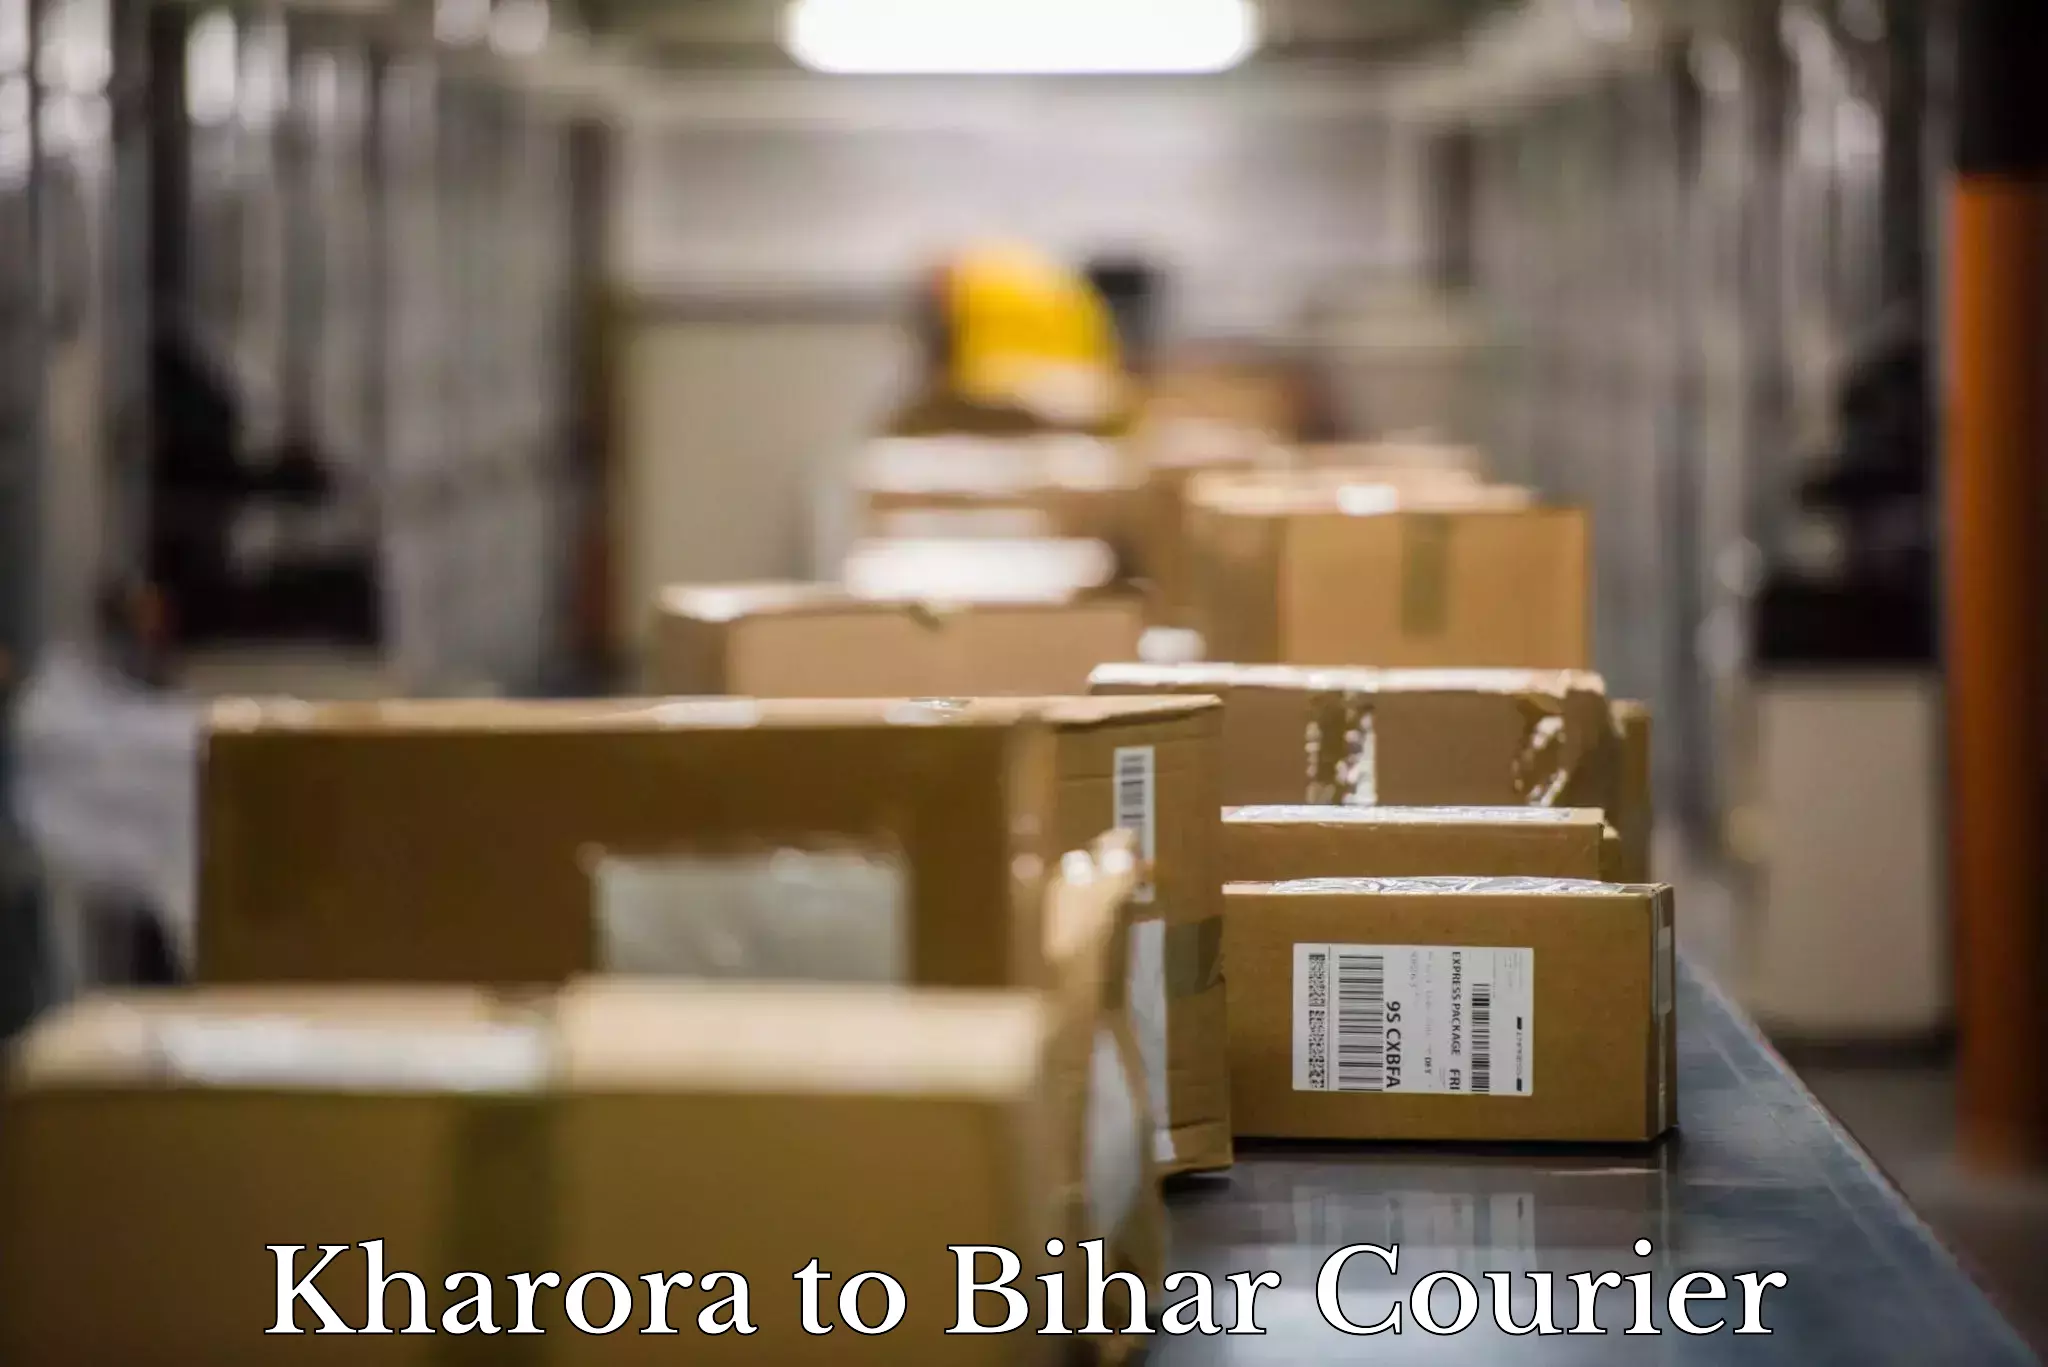 Quality moving and storage in Kharora to Piro